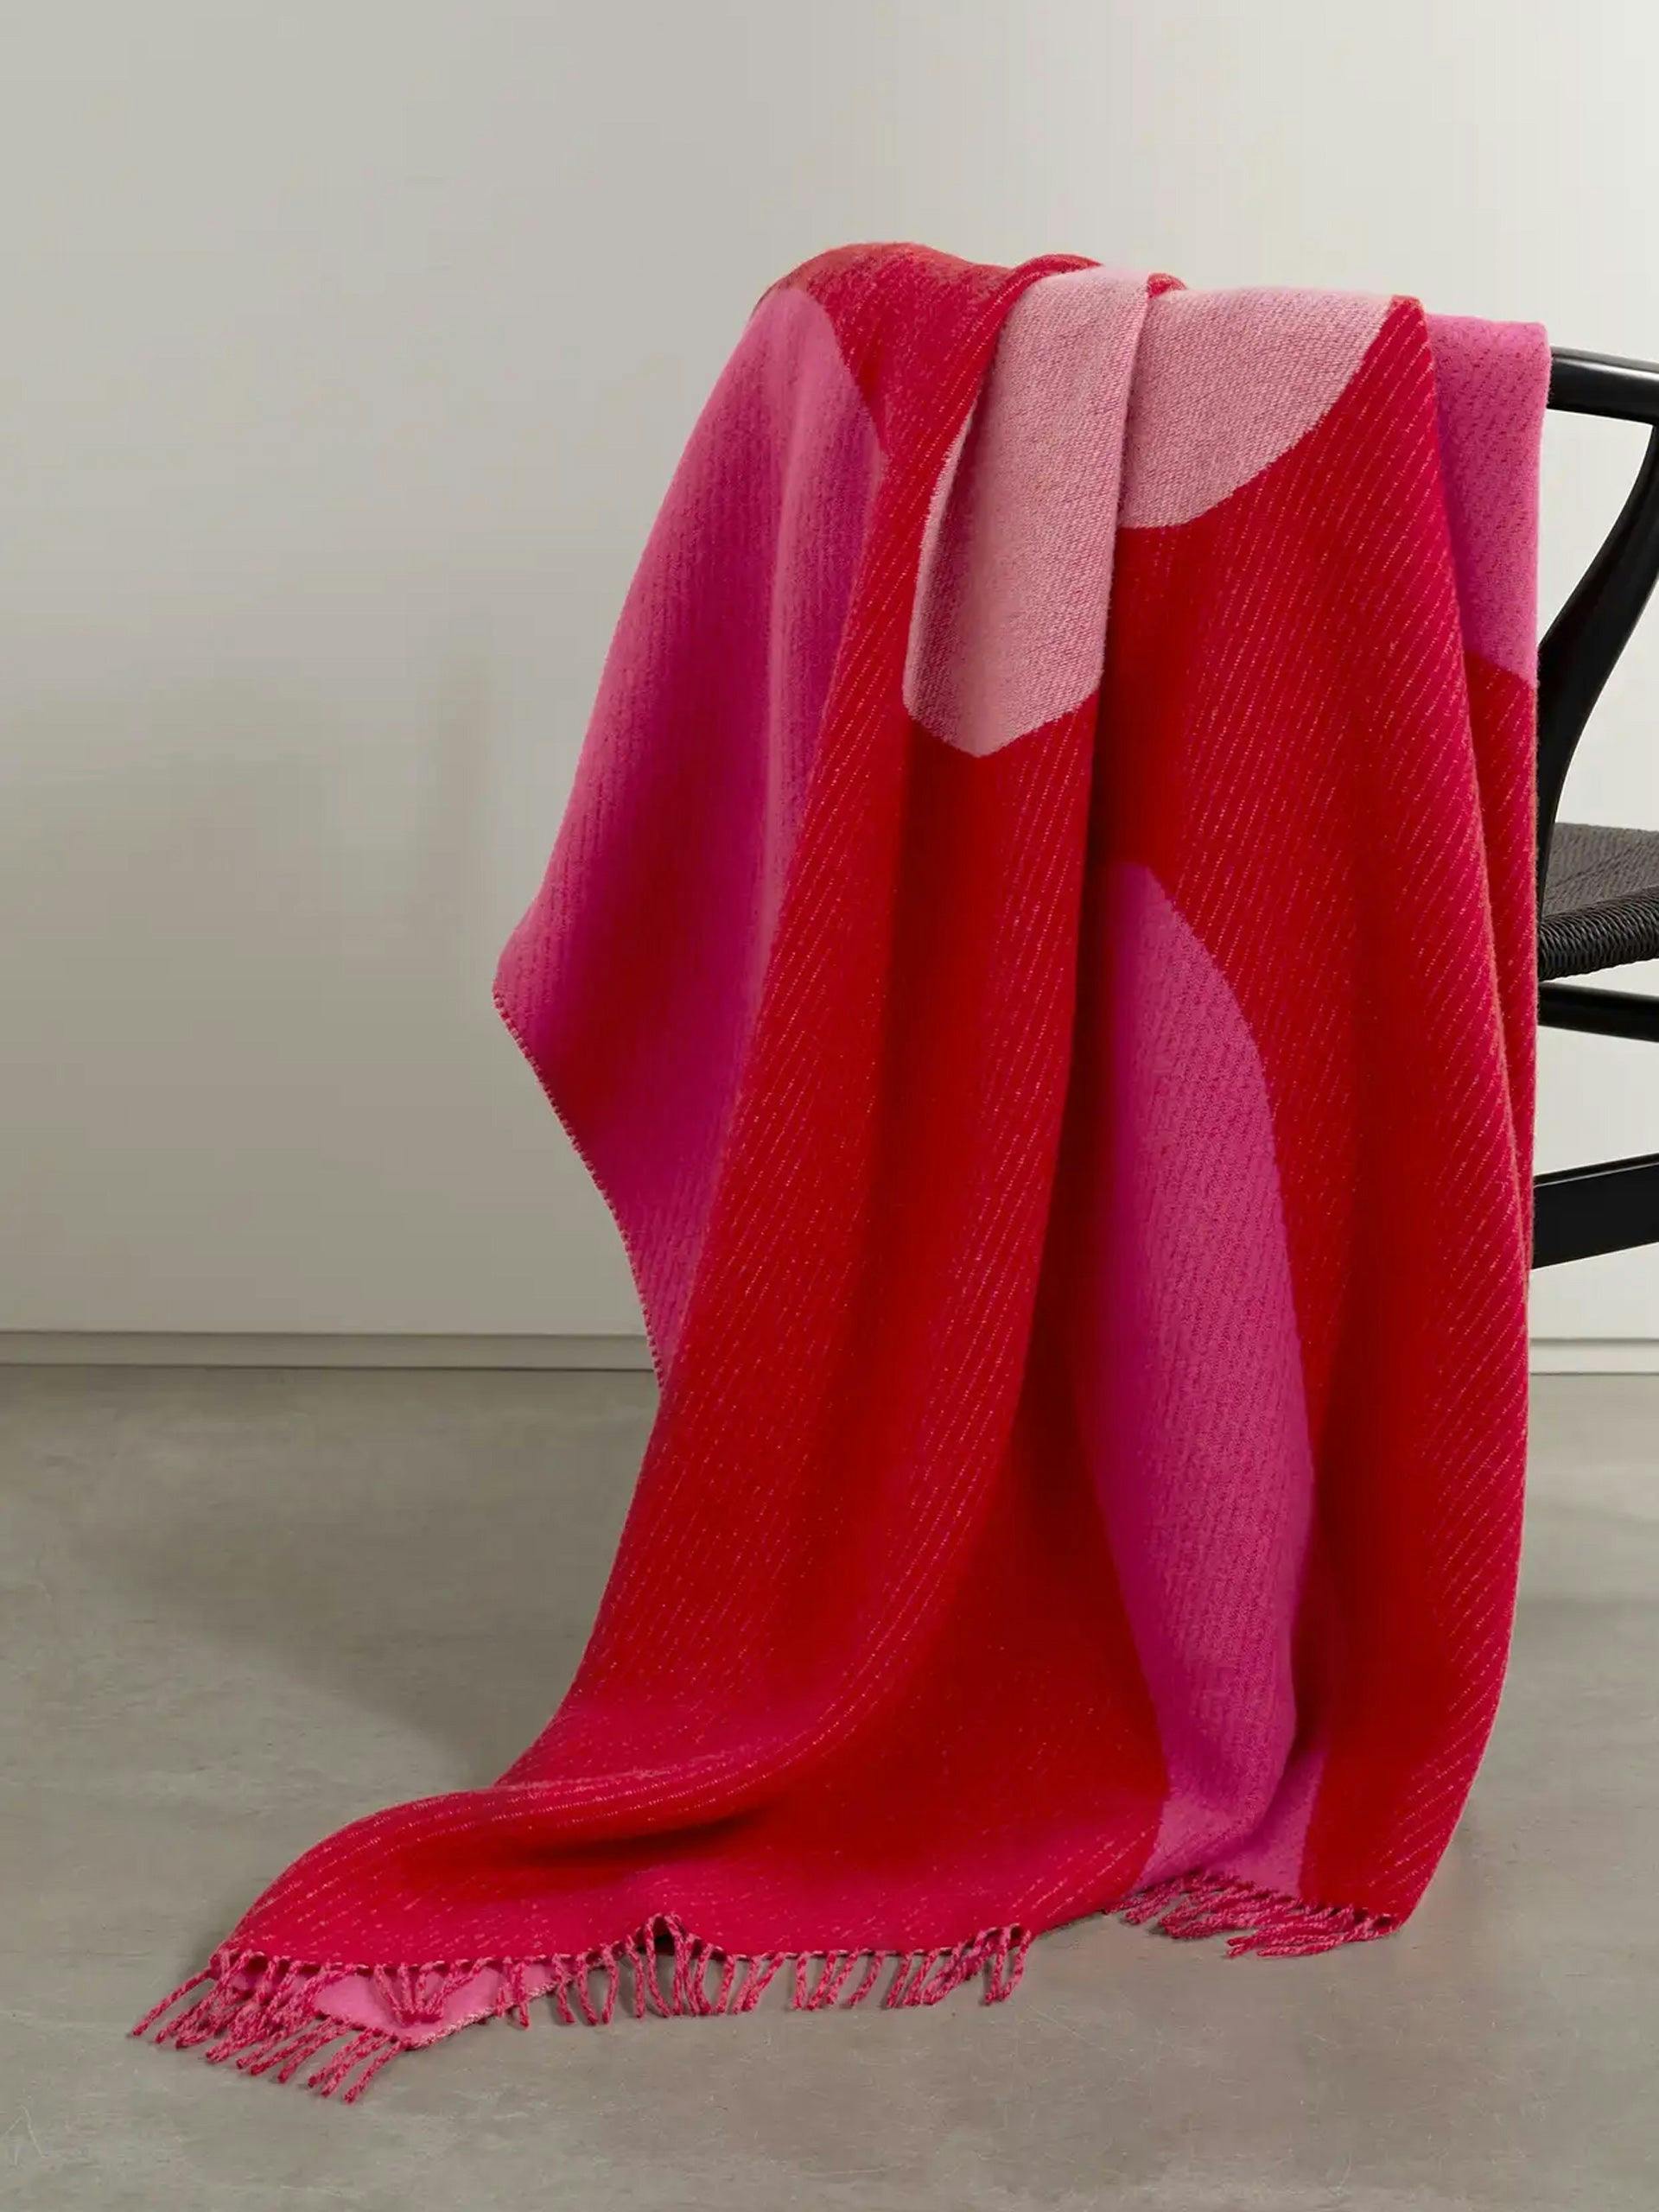 Olimpia Zagoni "Teenagers from Mars” wool and cashmere-blend blanket